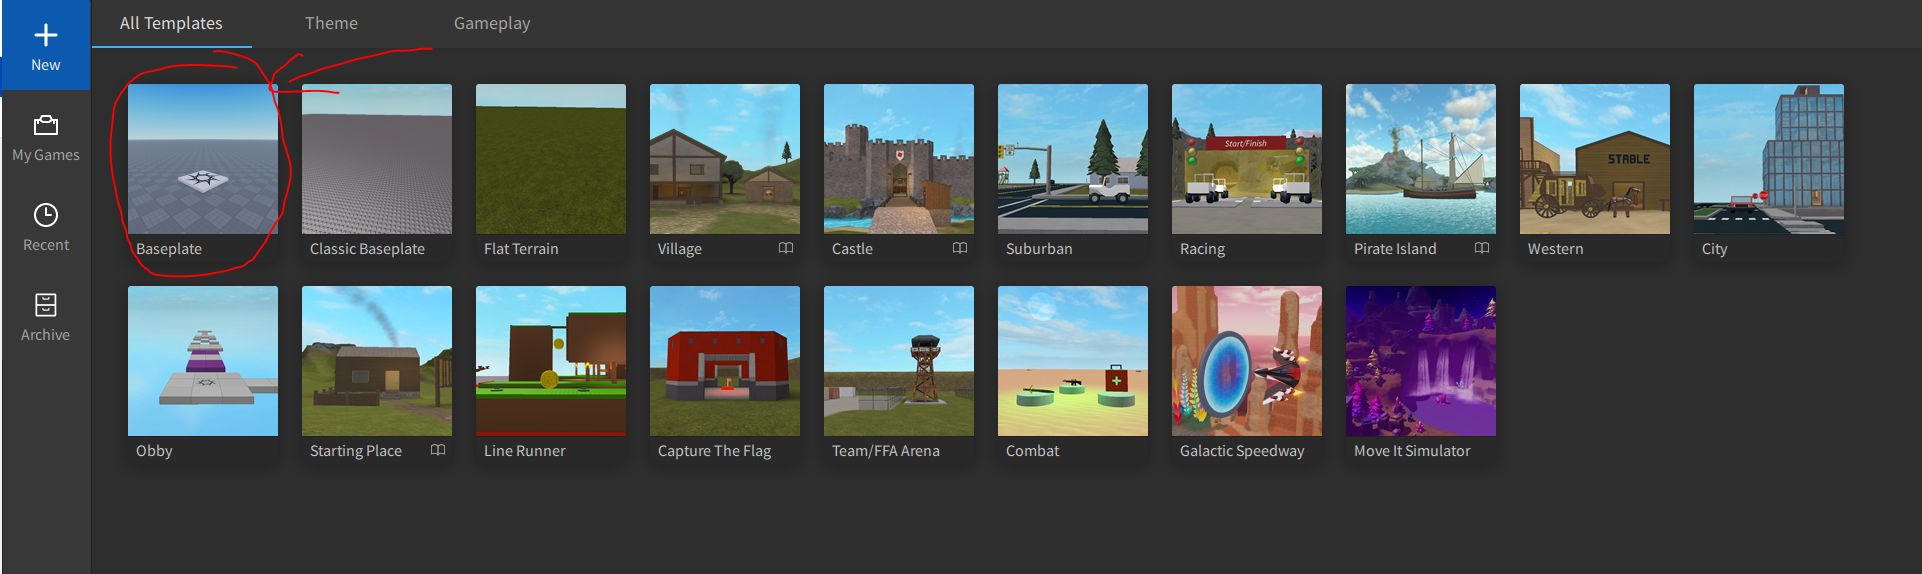 How to create a Roblox game: A fun side project for developers